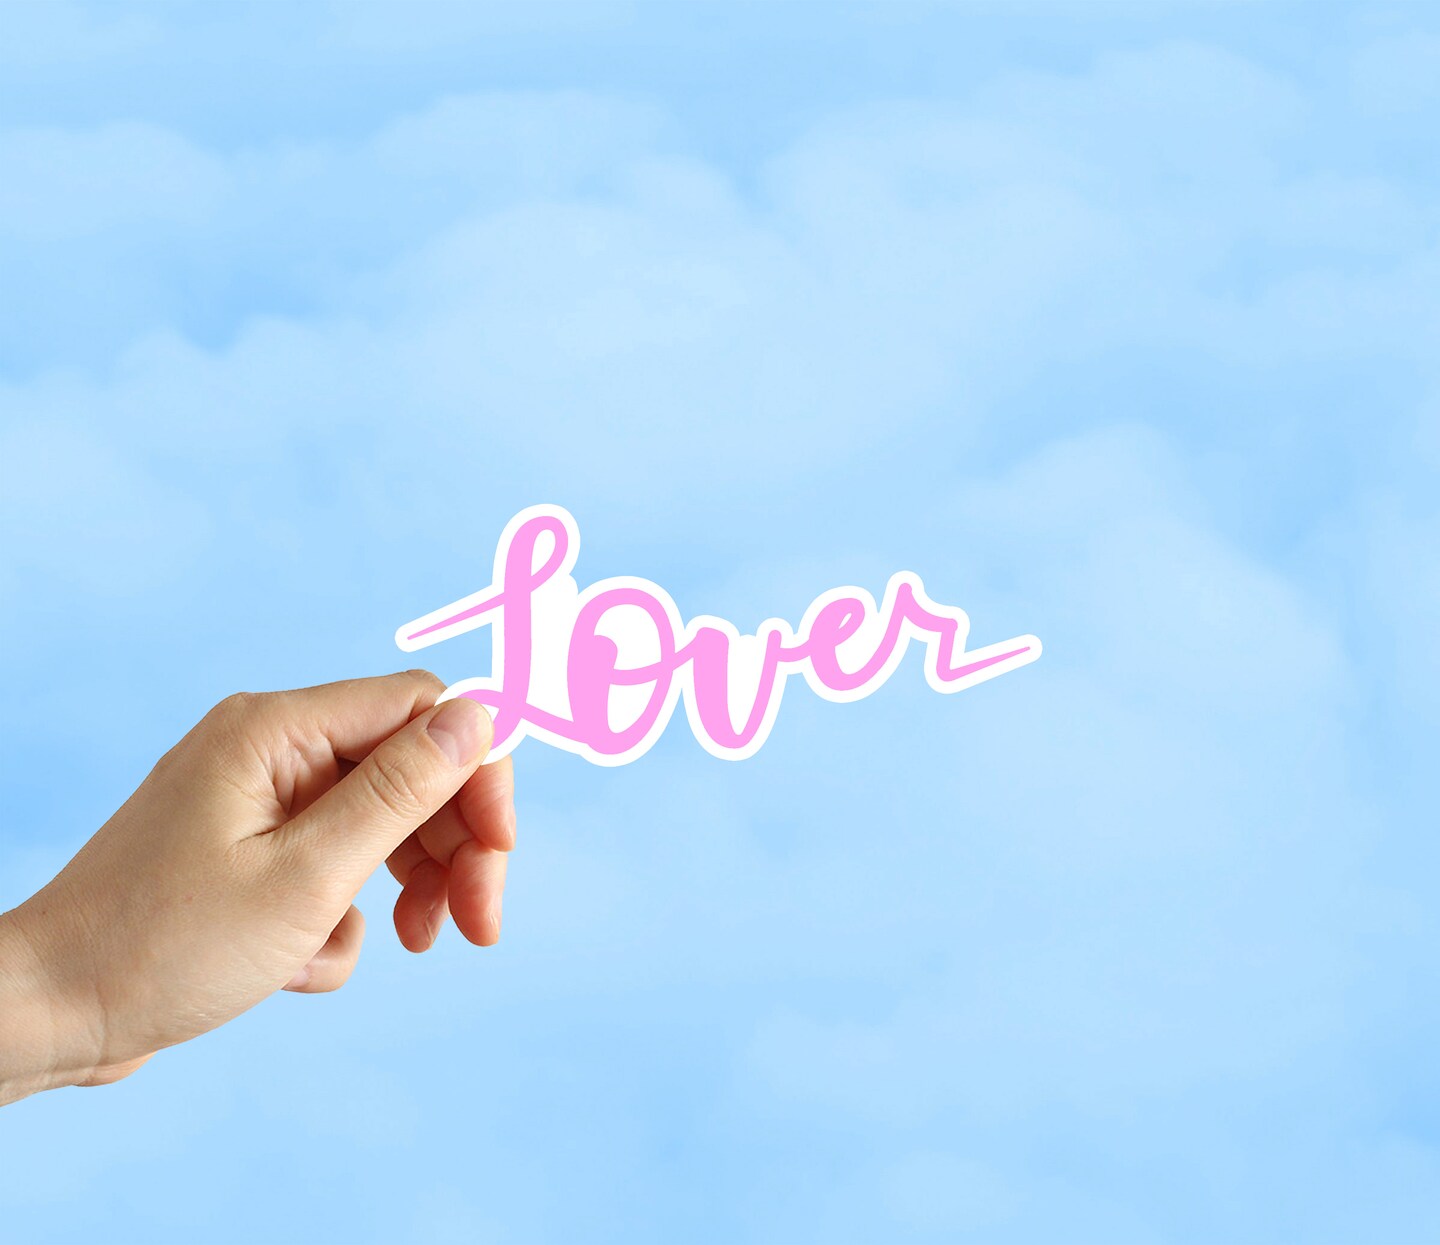 Taylor Swift Lover Stickers for Sale